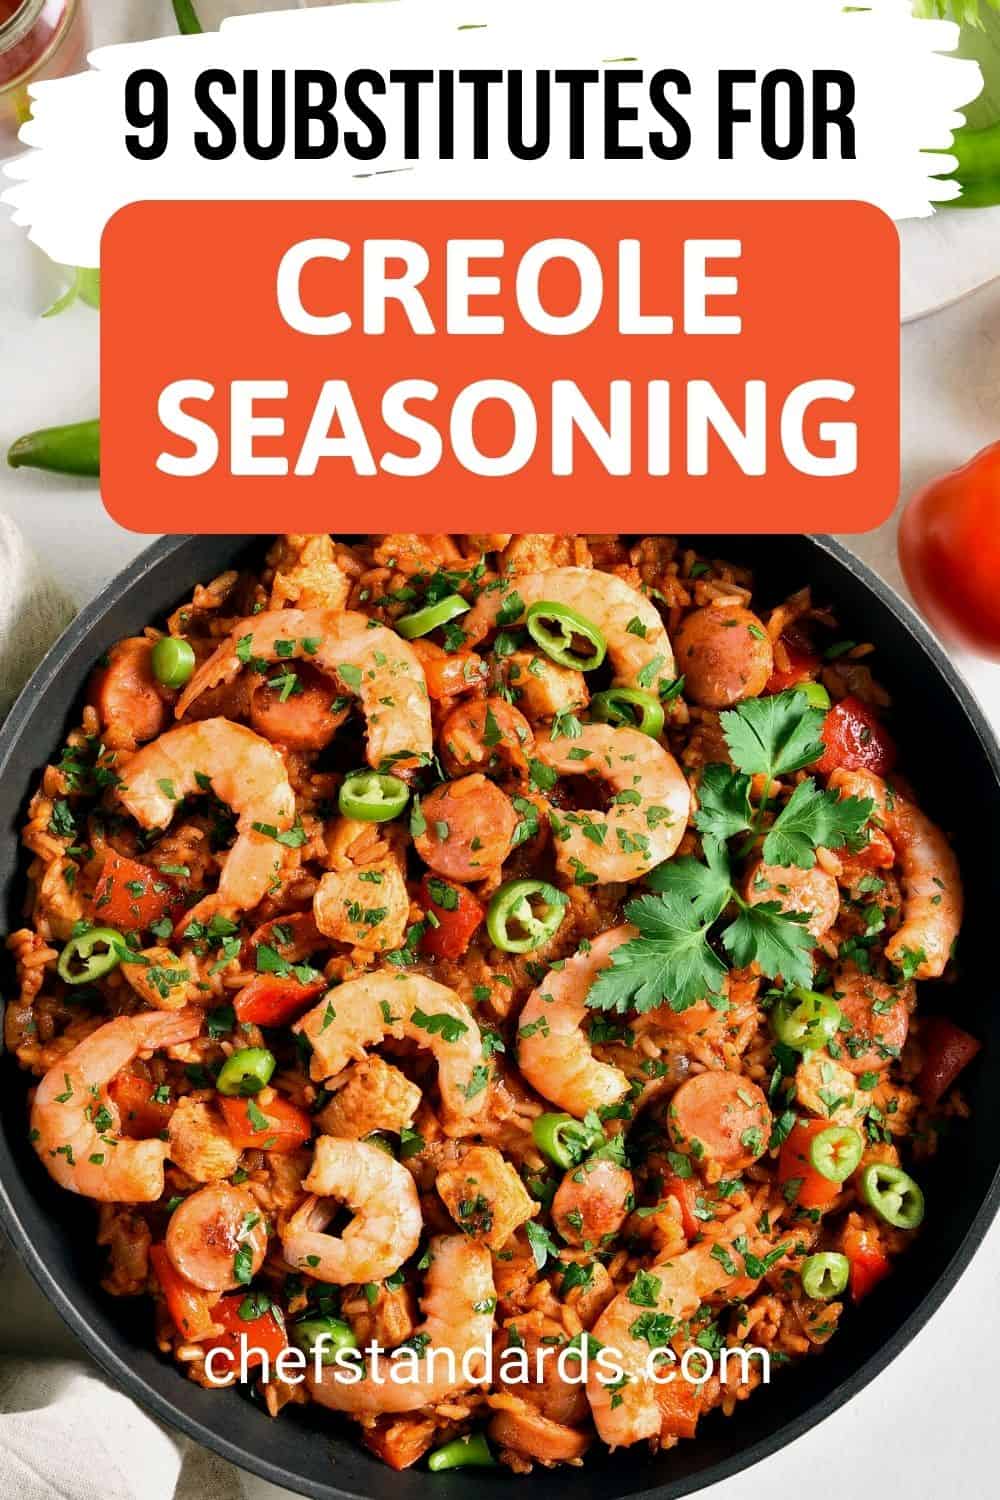 9 Options To Use As A Substitute For Creole Seasoning + Recipe 